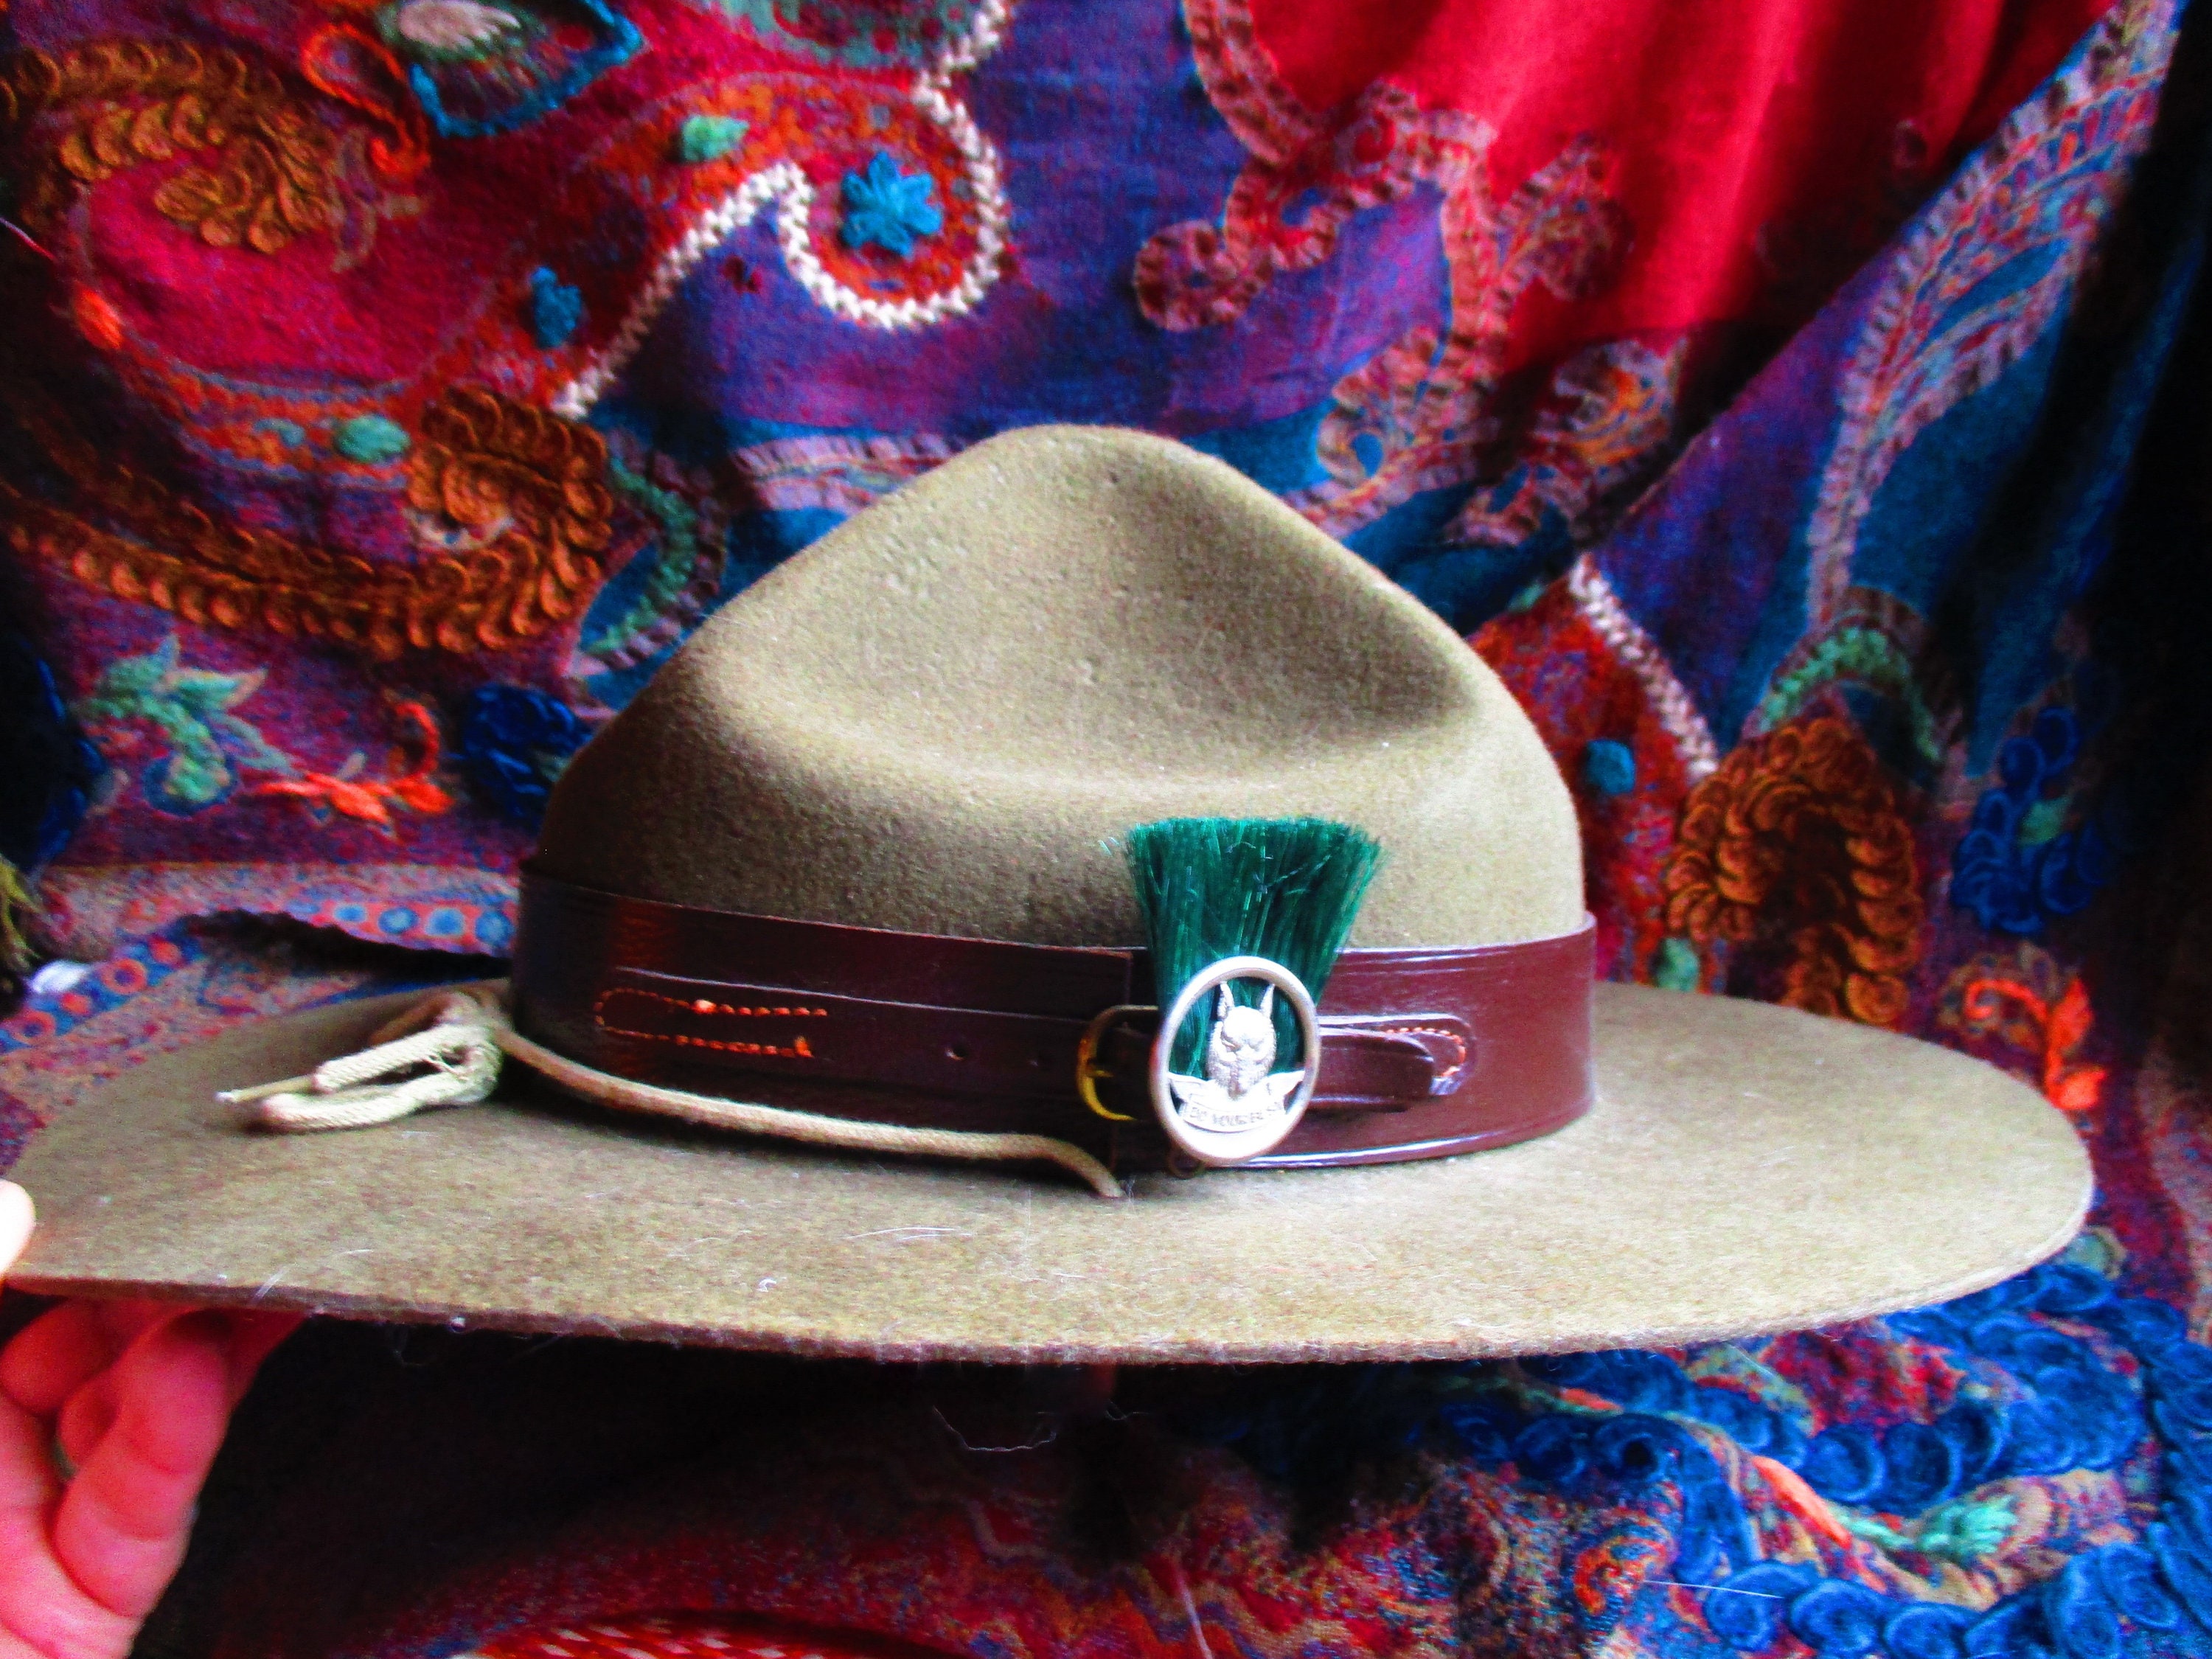 1950's Boy Scout leader's hat, official Troop leader, wide brim, wool felt,  leather band, wolf badge with thistle, memorabilia, cosplay